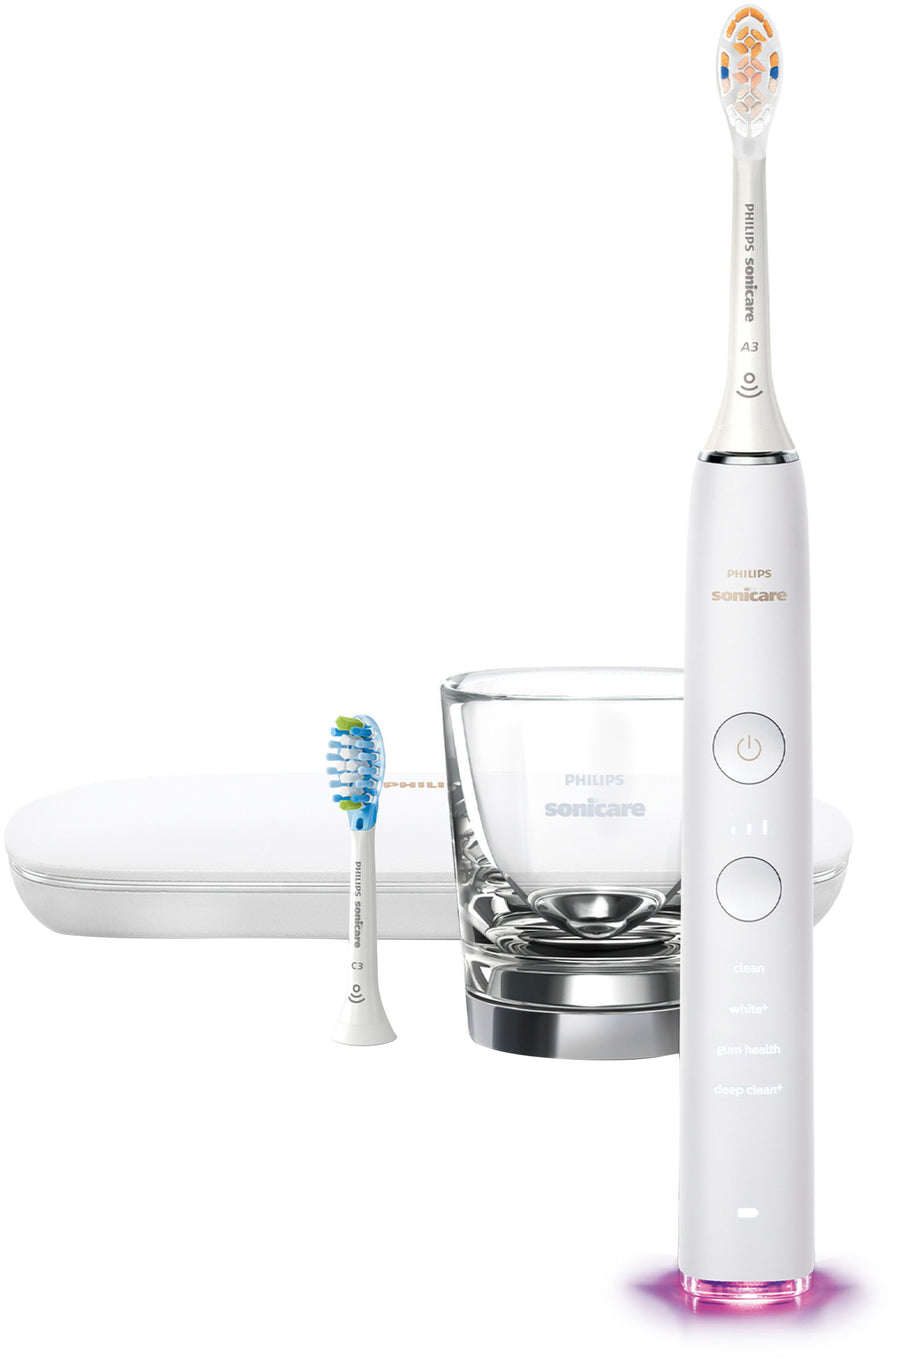 Philips Sonicare DiamondClean Smart Electric, Rechargeable Toothbrush for Complete Oral Care – 9300 Series - White_0